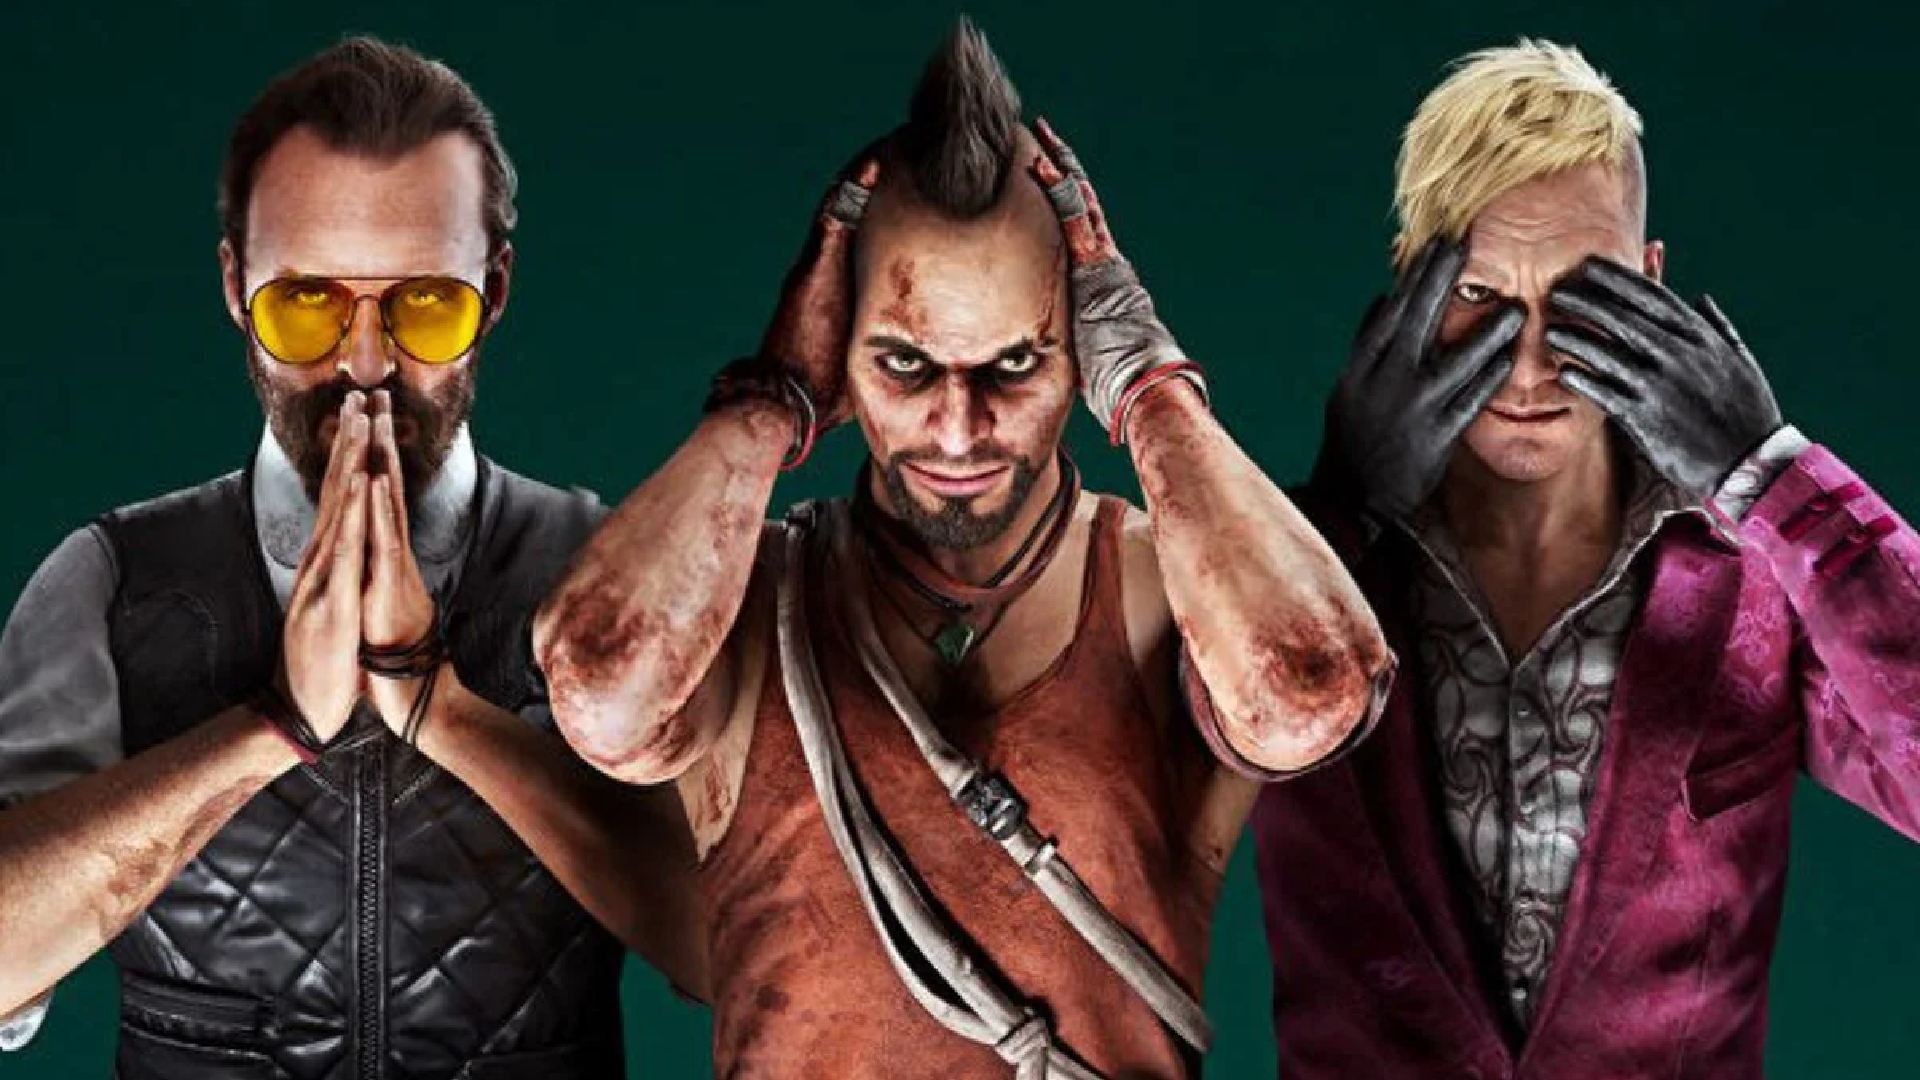 Far Cry 6 DLC release date – Become the Villain DLC, Special Operations,  and more